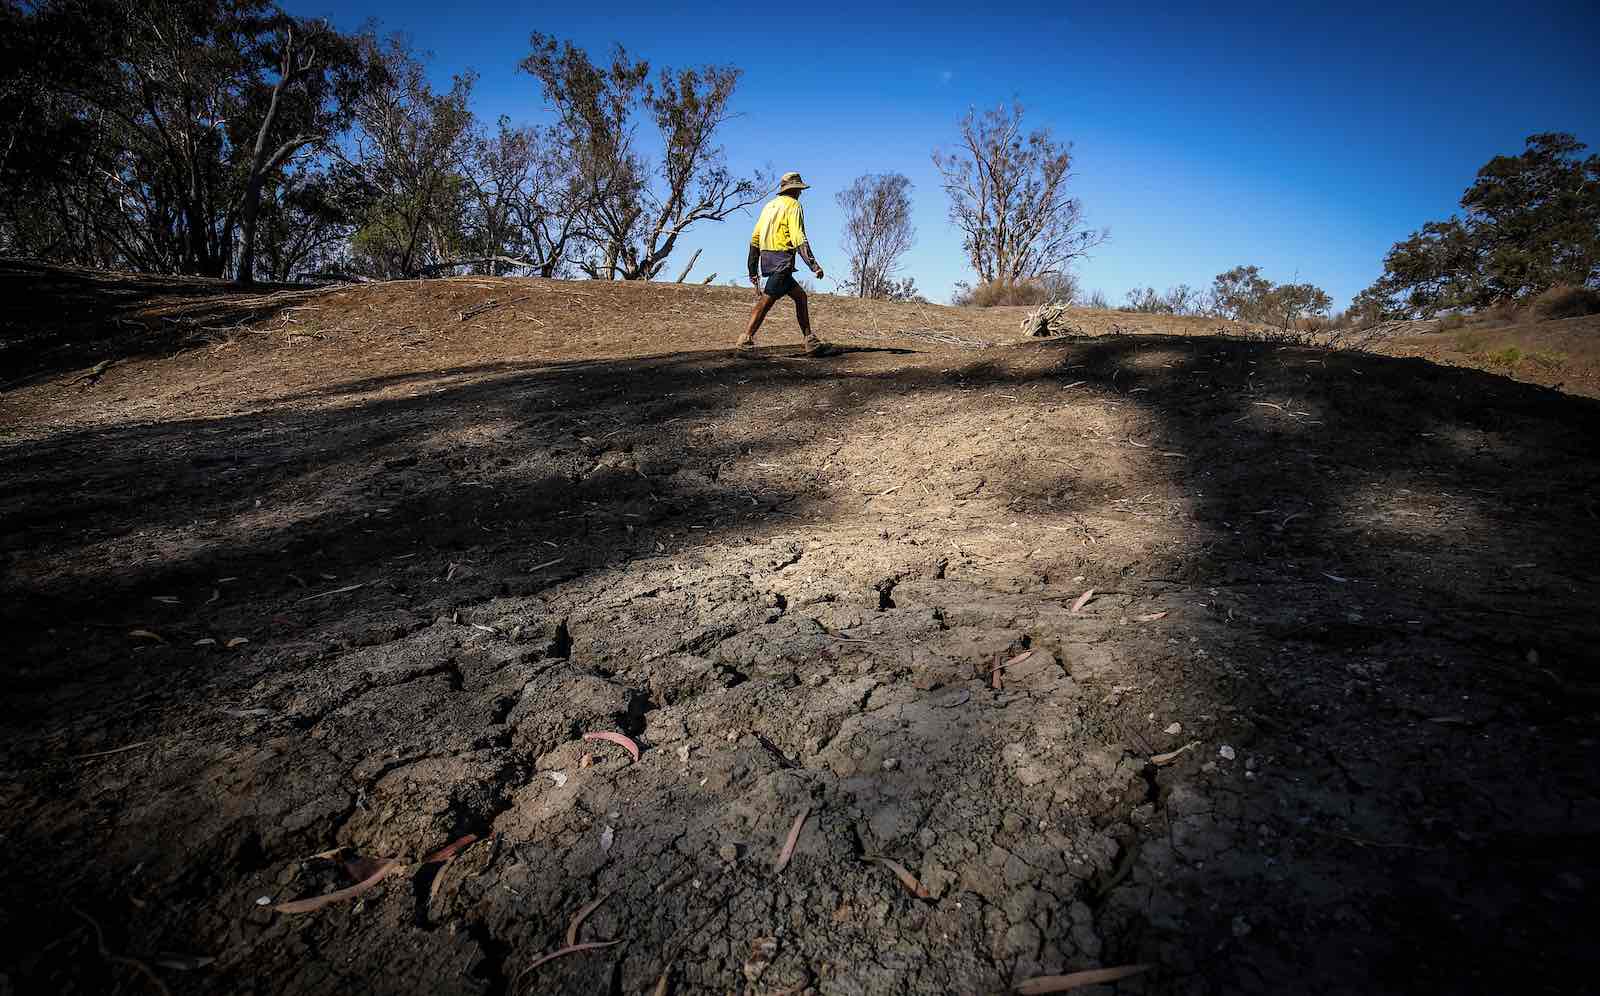 A farmer walks in the dried-up bed of the Namoi River near Walgett, NSW, 6 October. Severe drought and alleged mismanagement of water resources have led to the steady decline of rivers across the Murray-Darling Basin (Photo: David Gray/Getty Images)